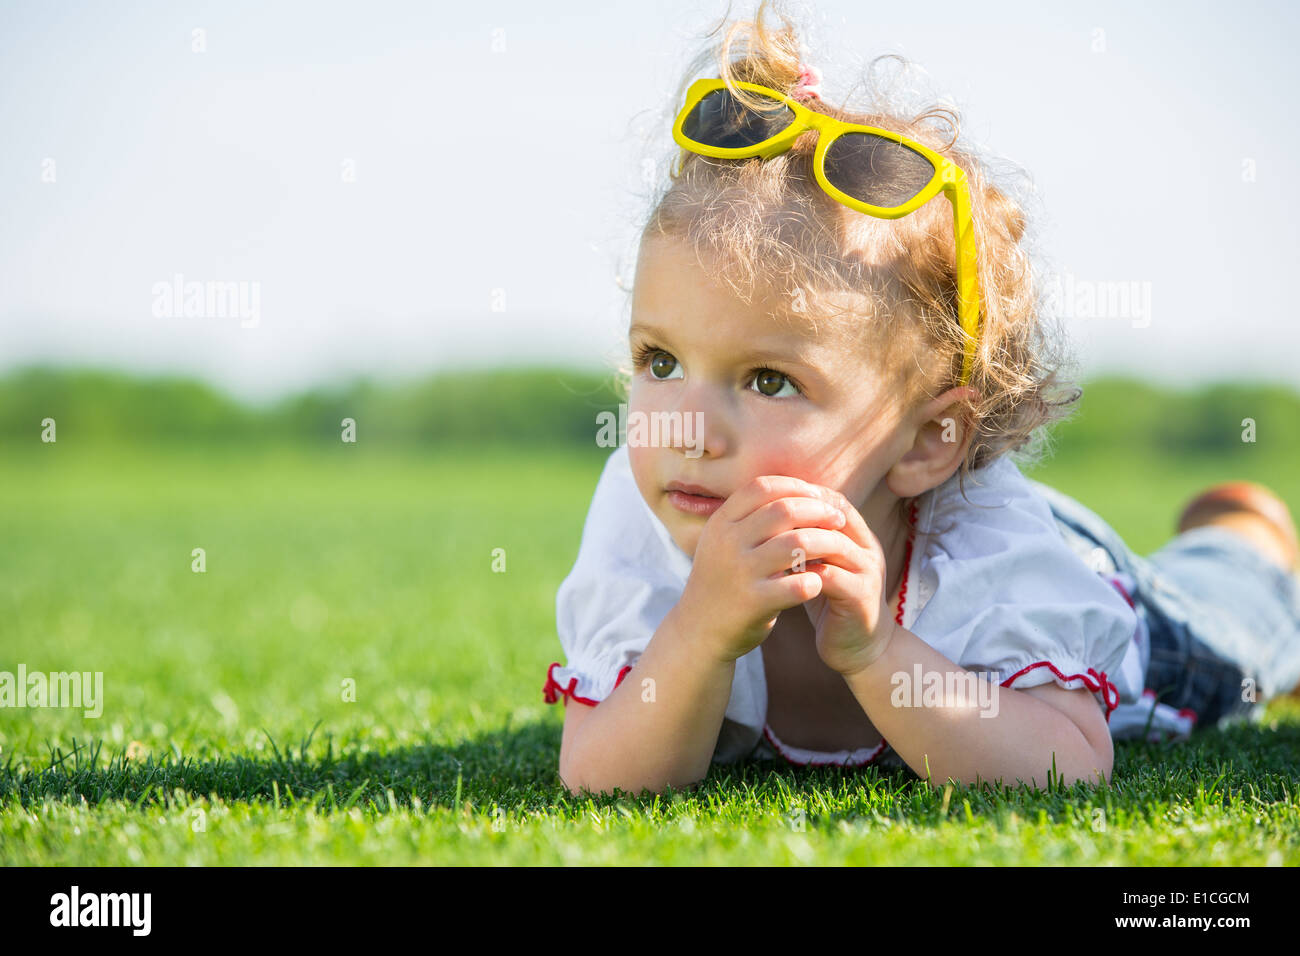 Cute little girl with yellow sun glasses on top of her head, lying on a fresh green grass in a field Stock Photo